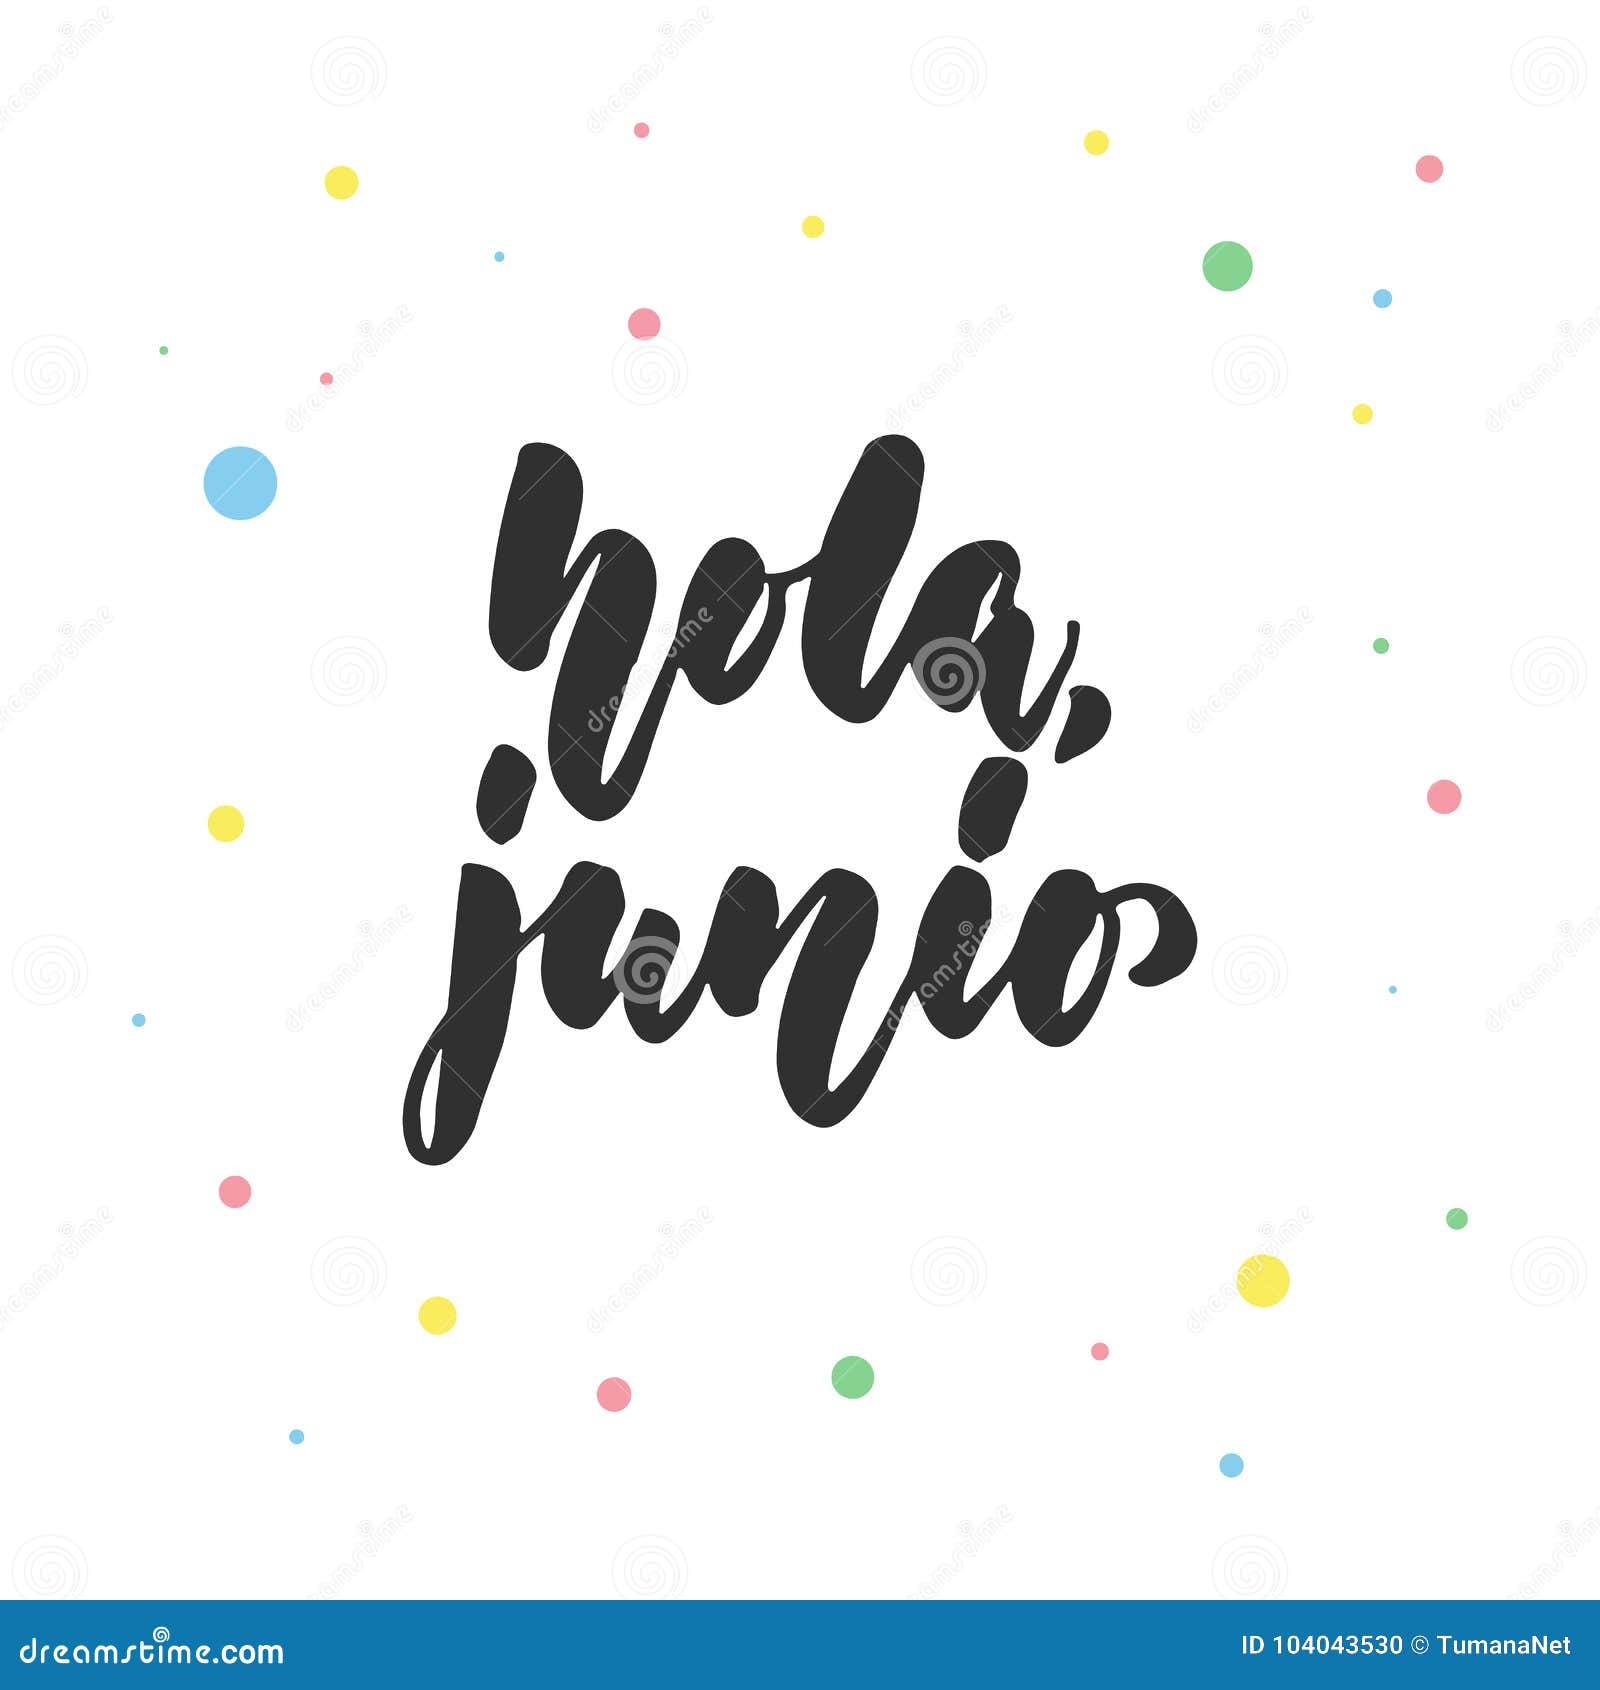 hola, junio - hello, june in spanish, hand drawn latin lettering quote with colorful circles  on the white